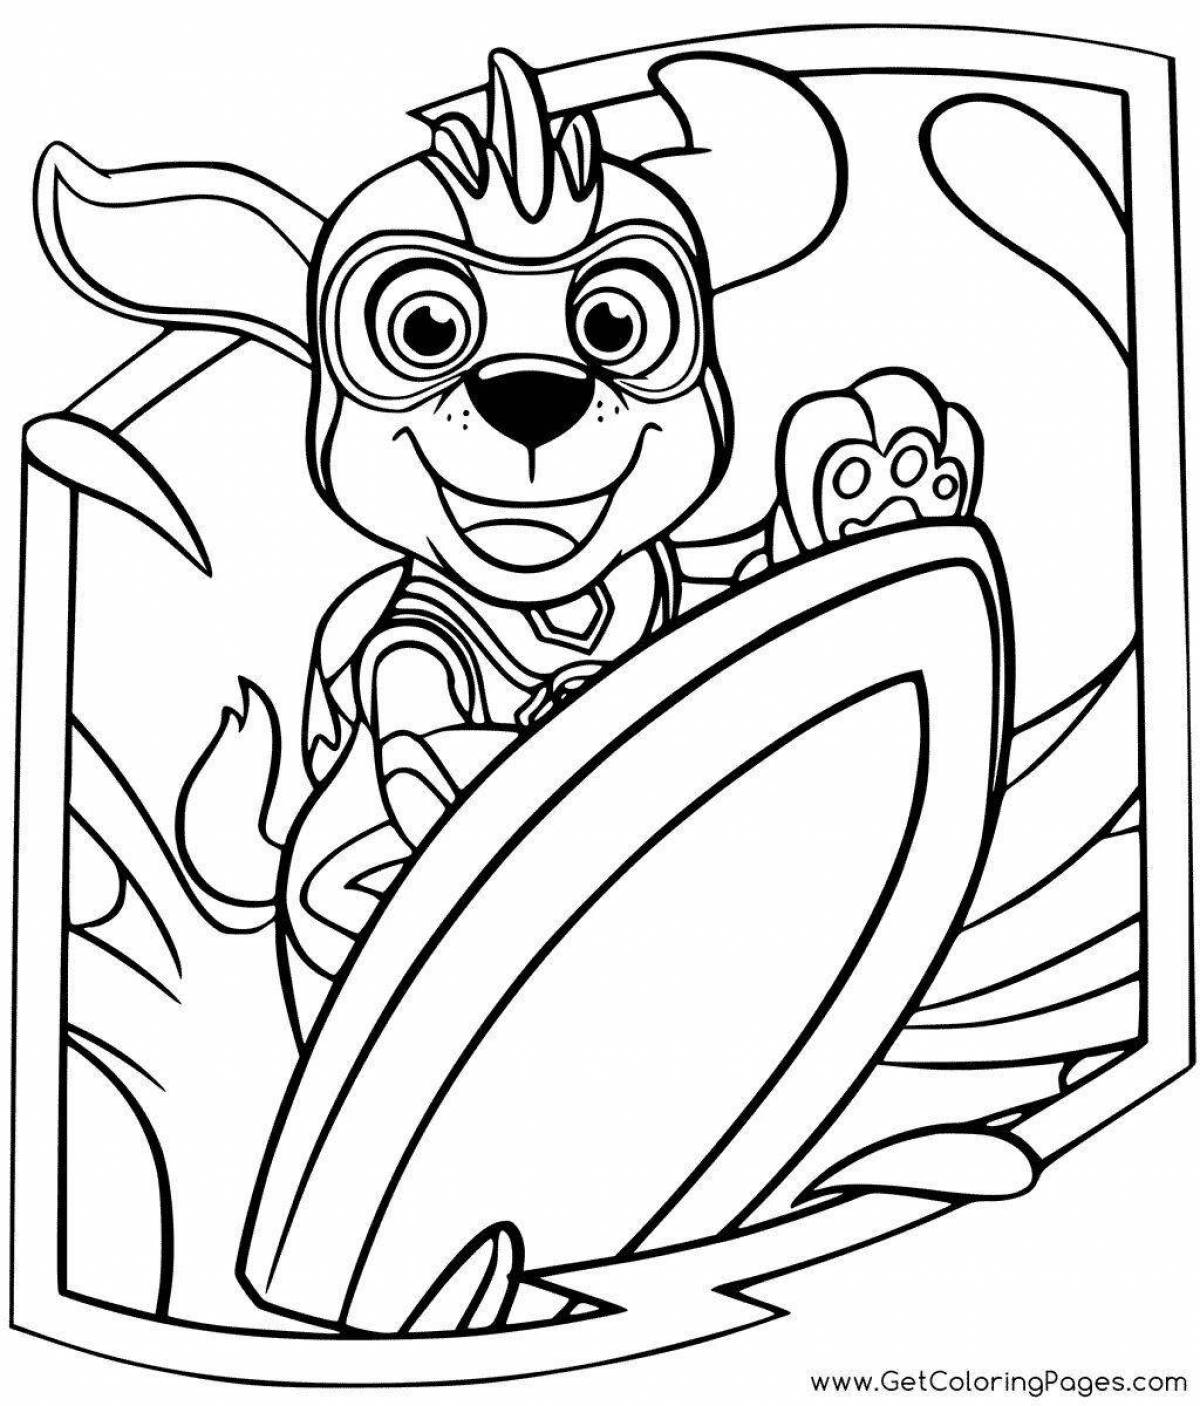 Paw Patrol puppies coloring page